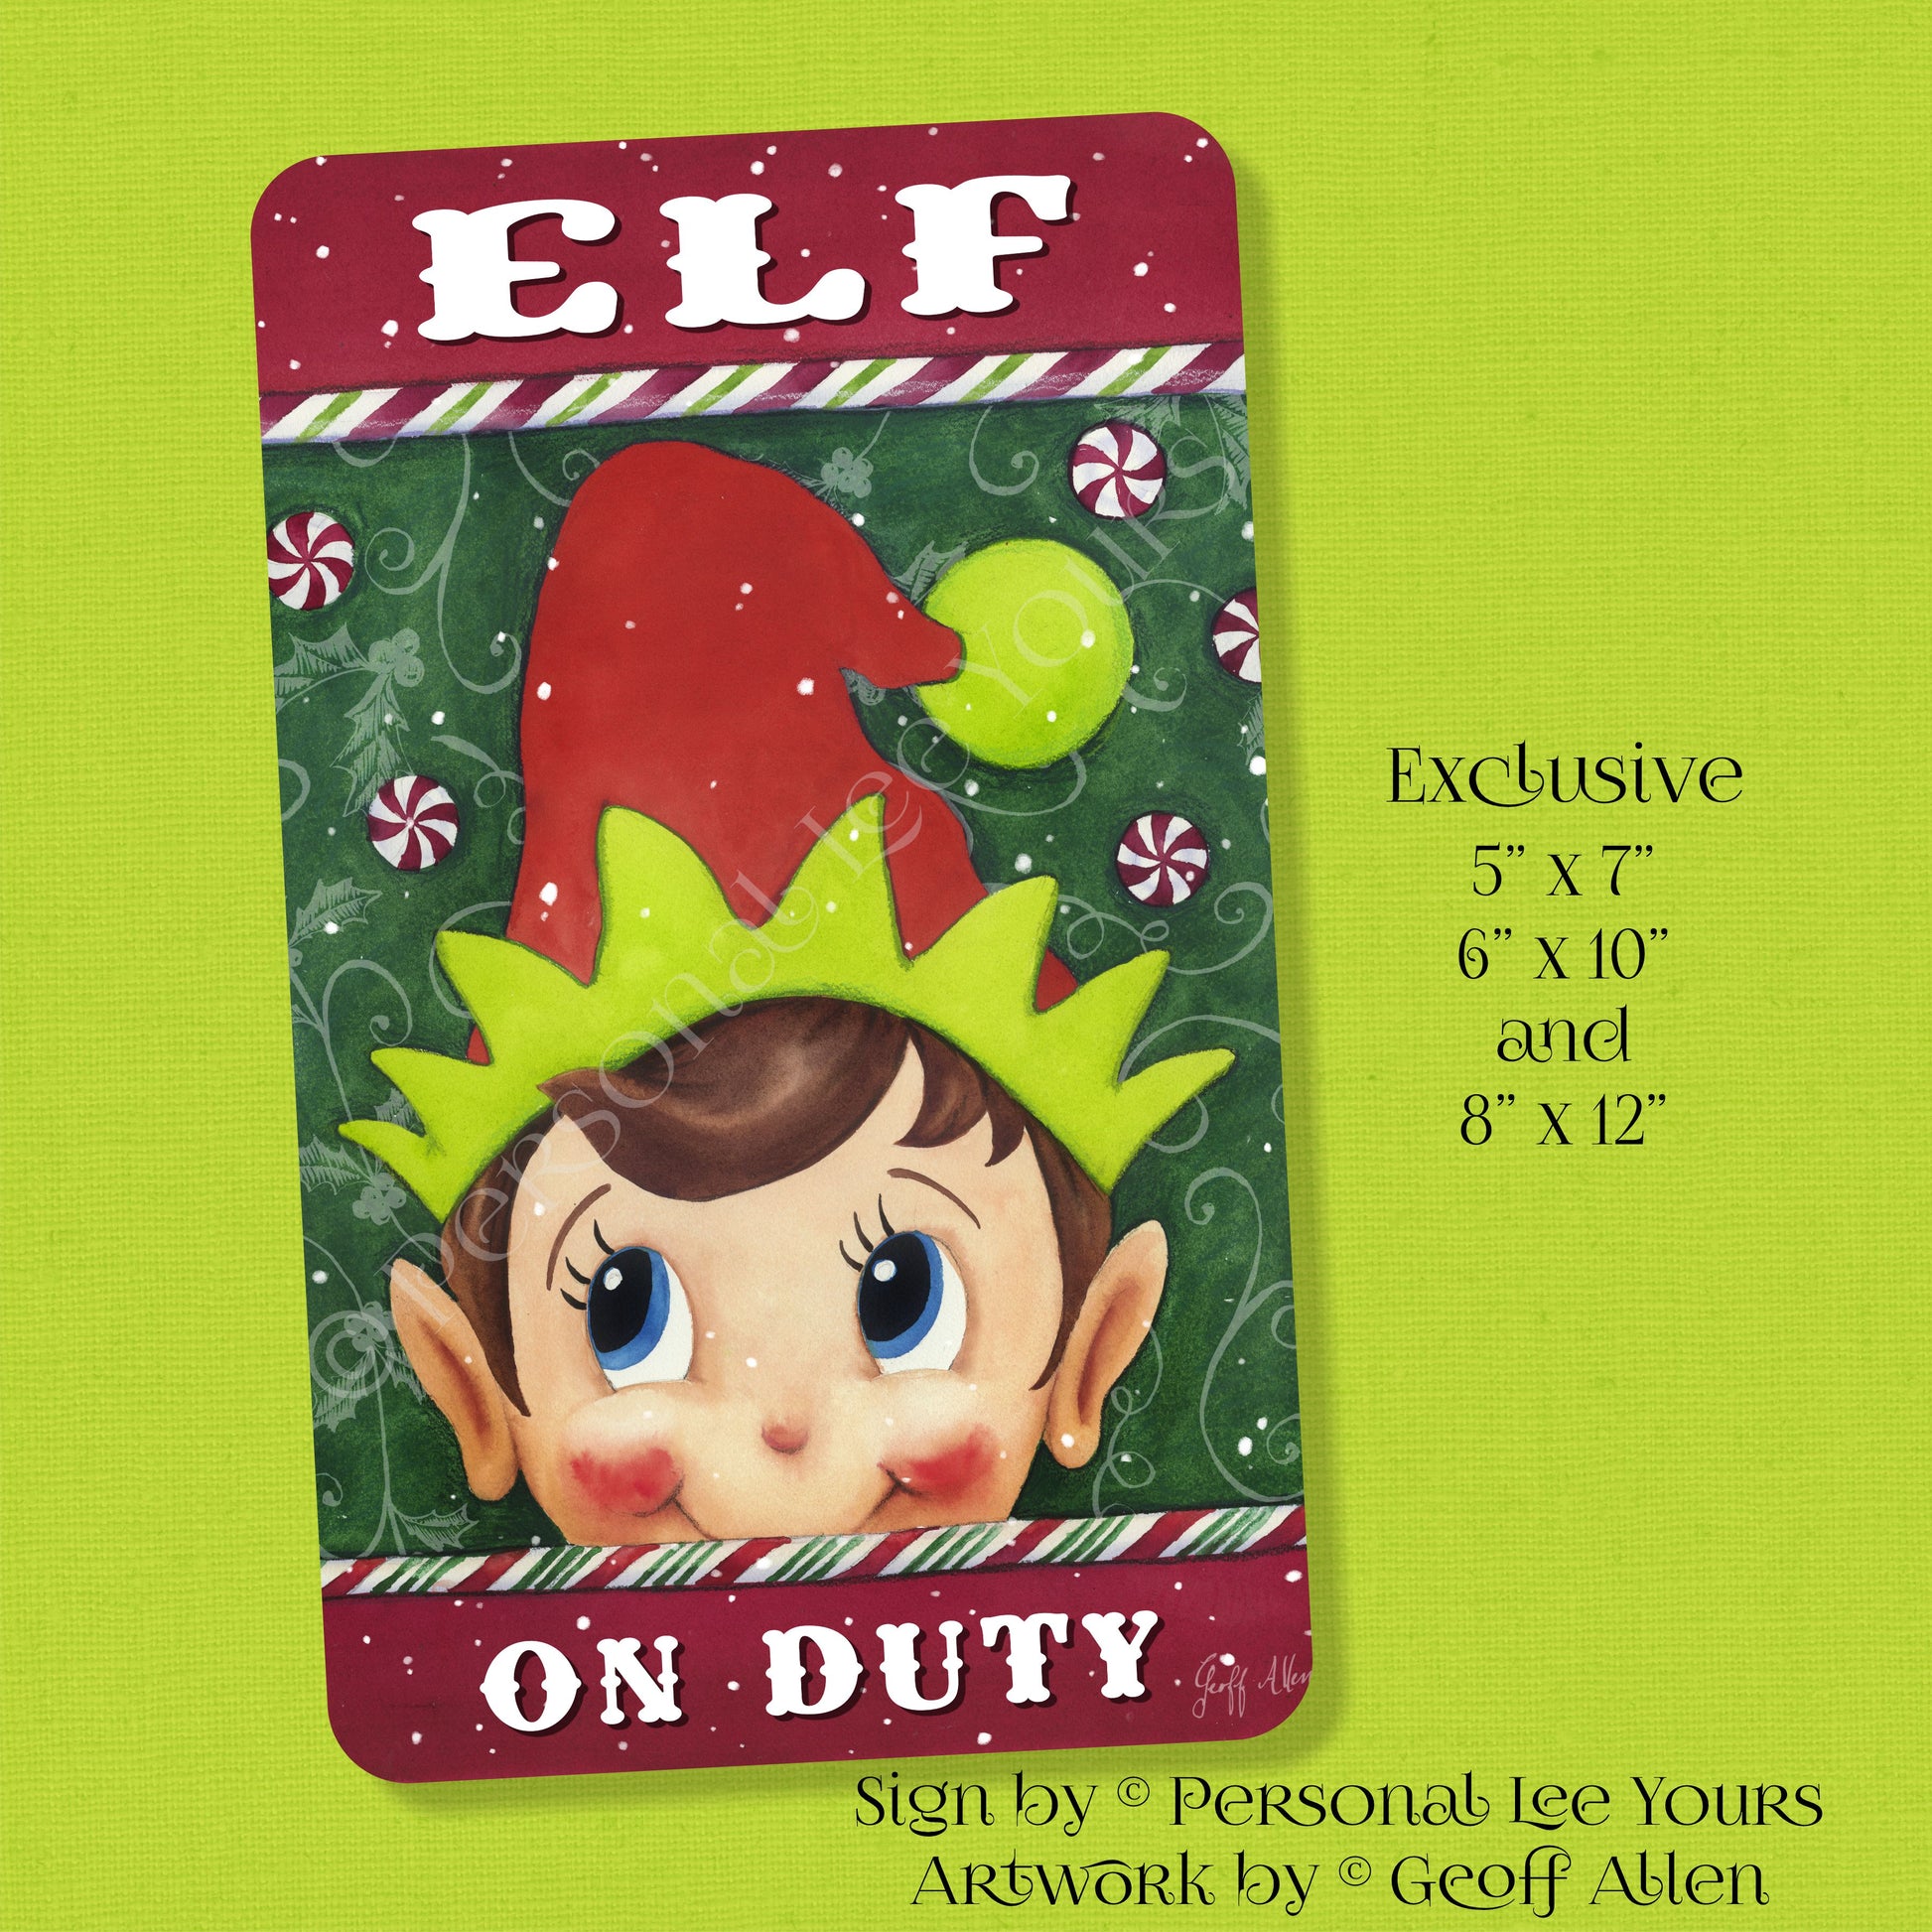 Lea and other elfs can do everything